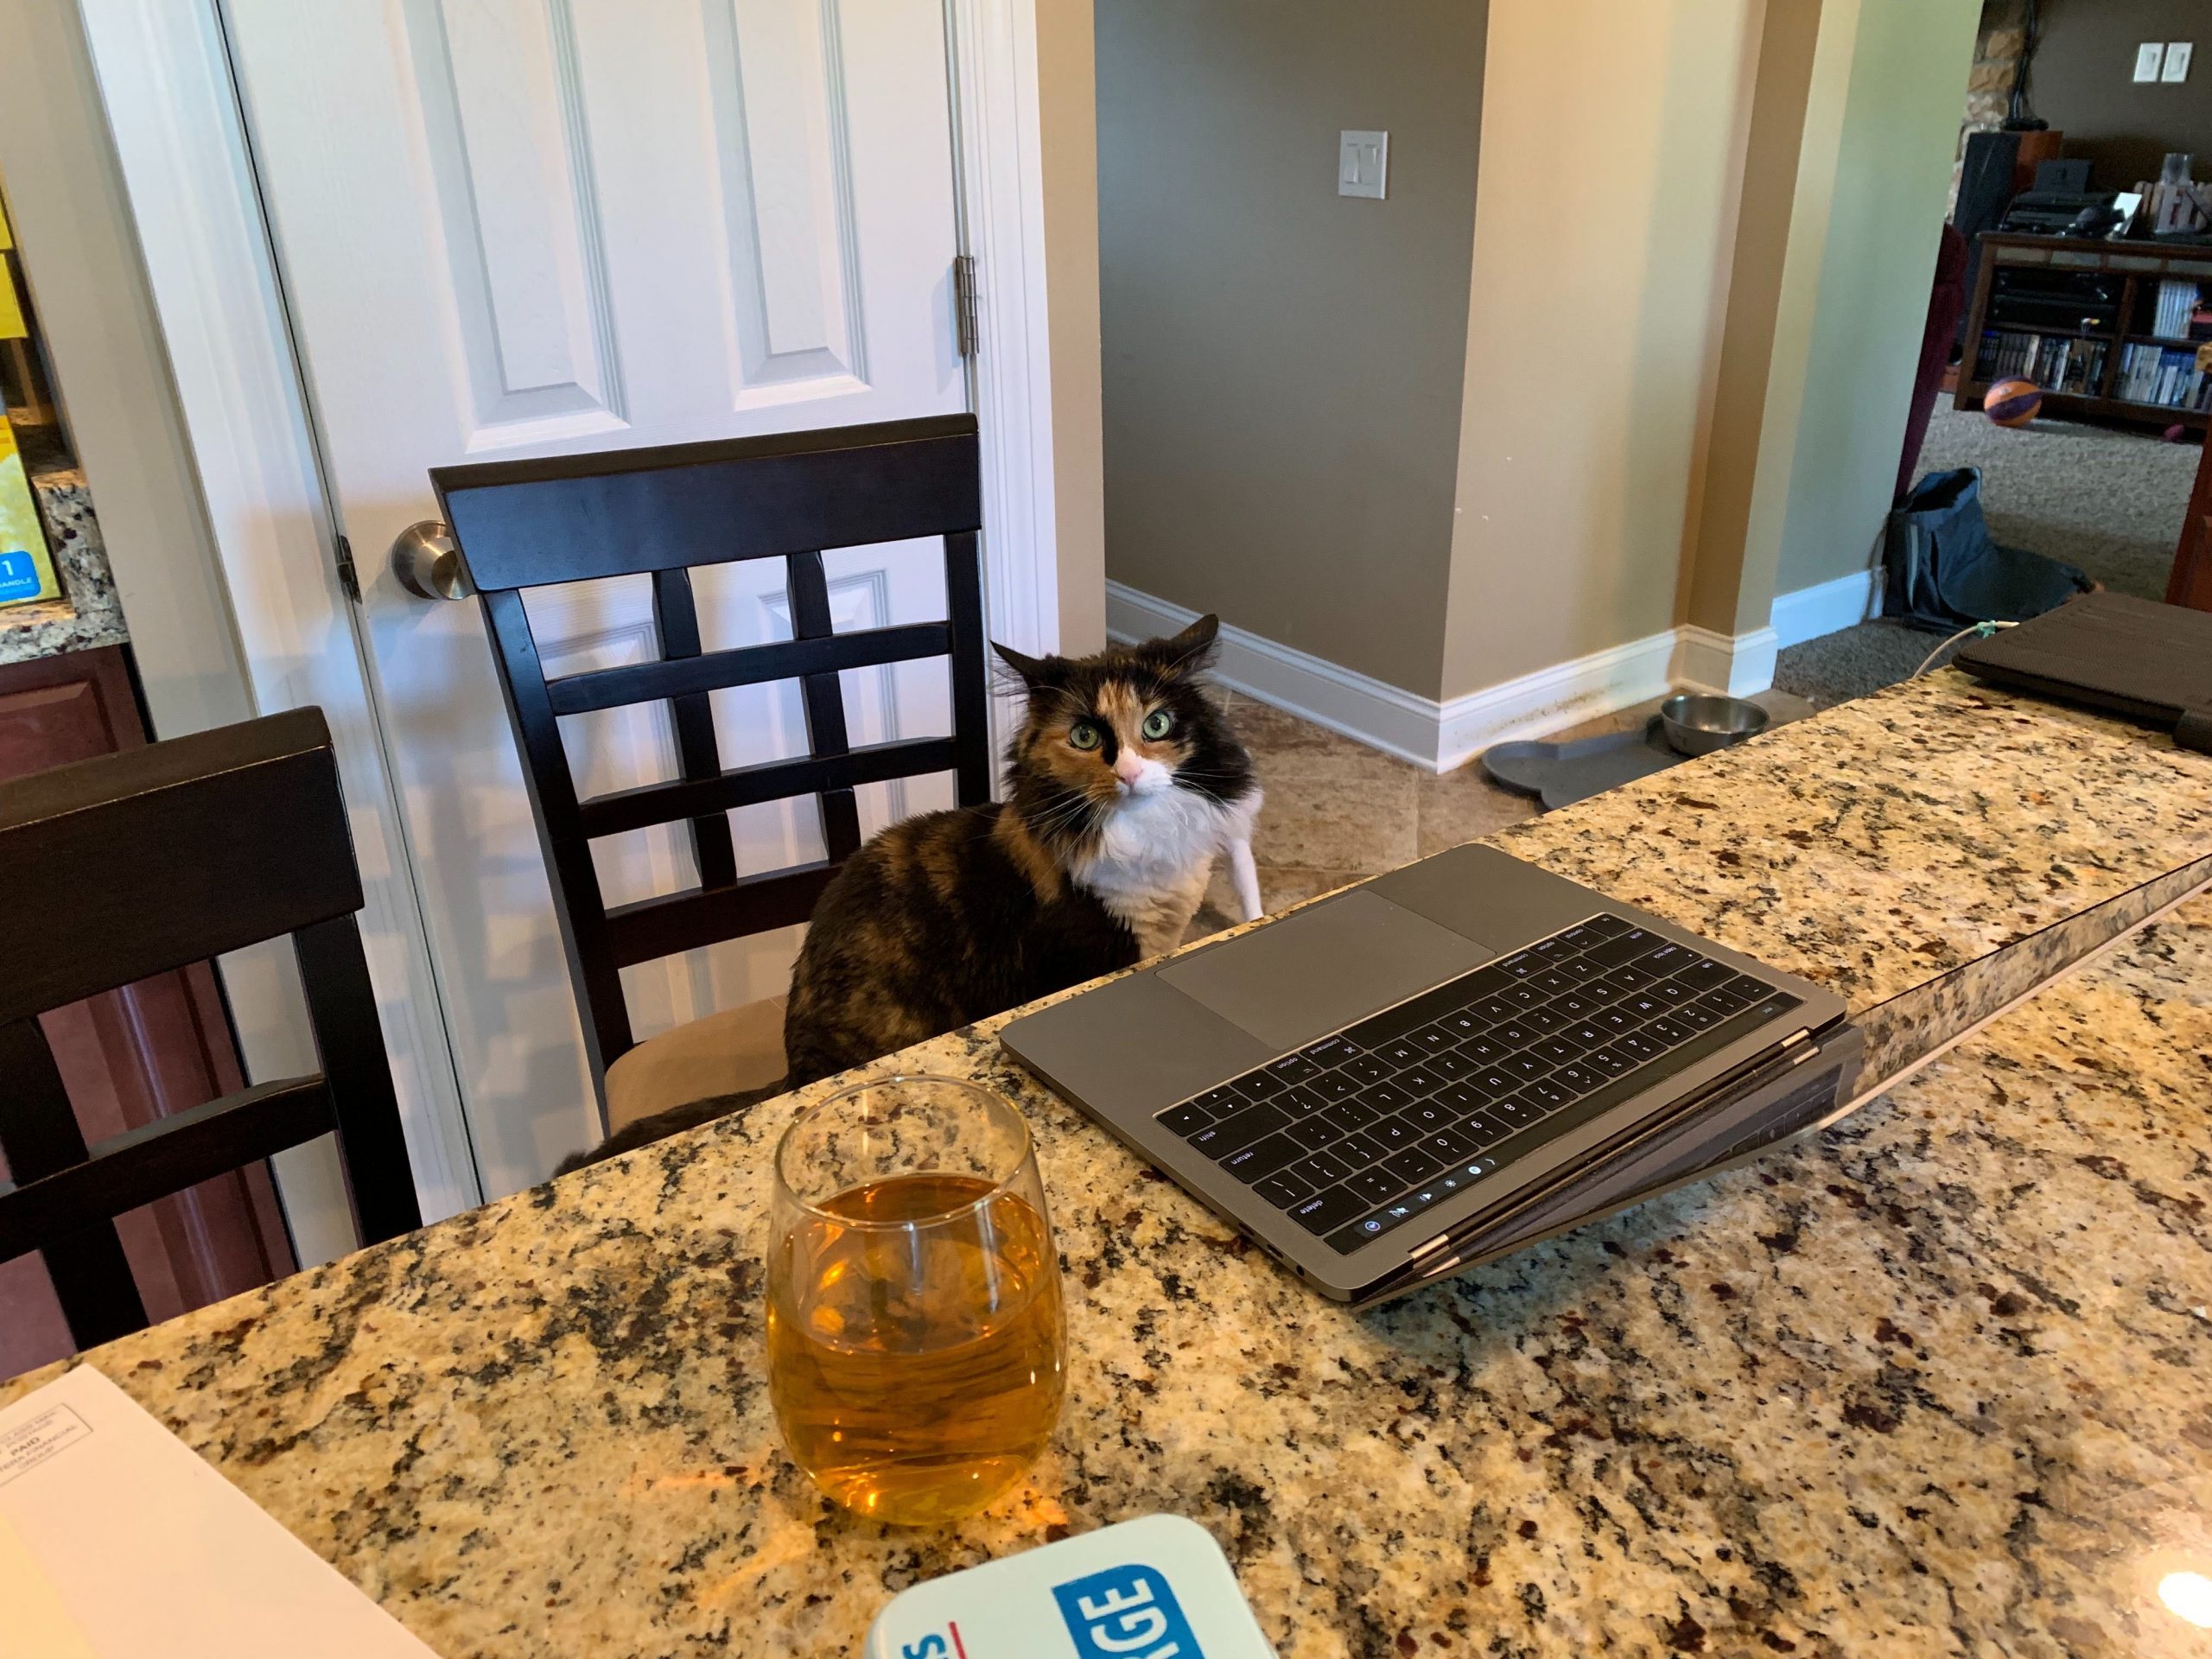 A cat sits on a kitchen chair, looking at its owner's laptop